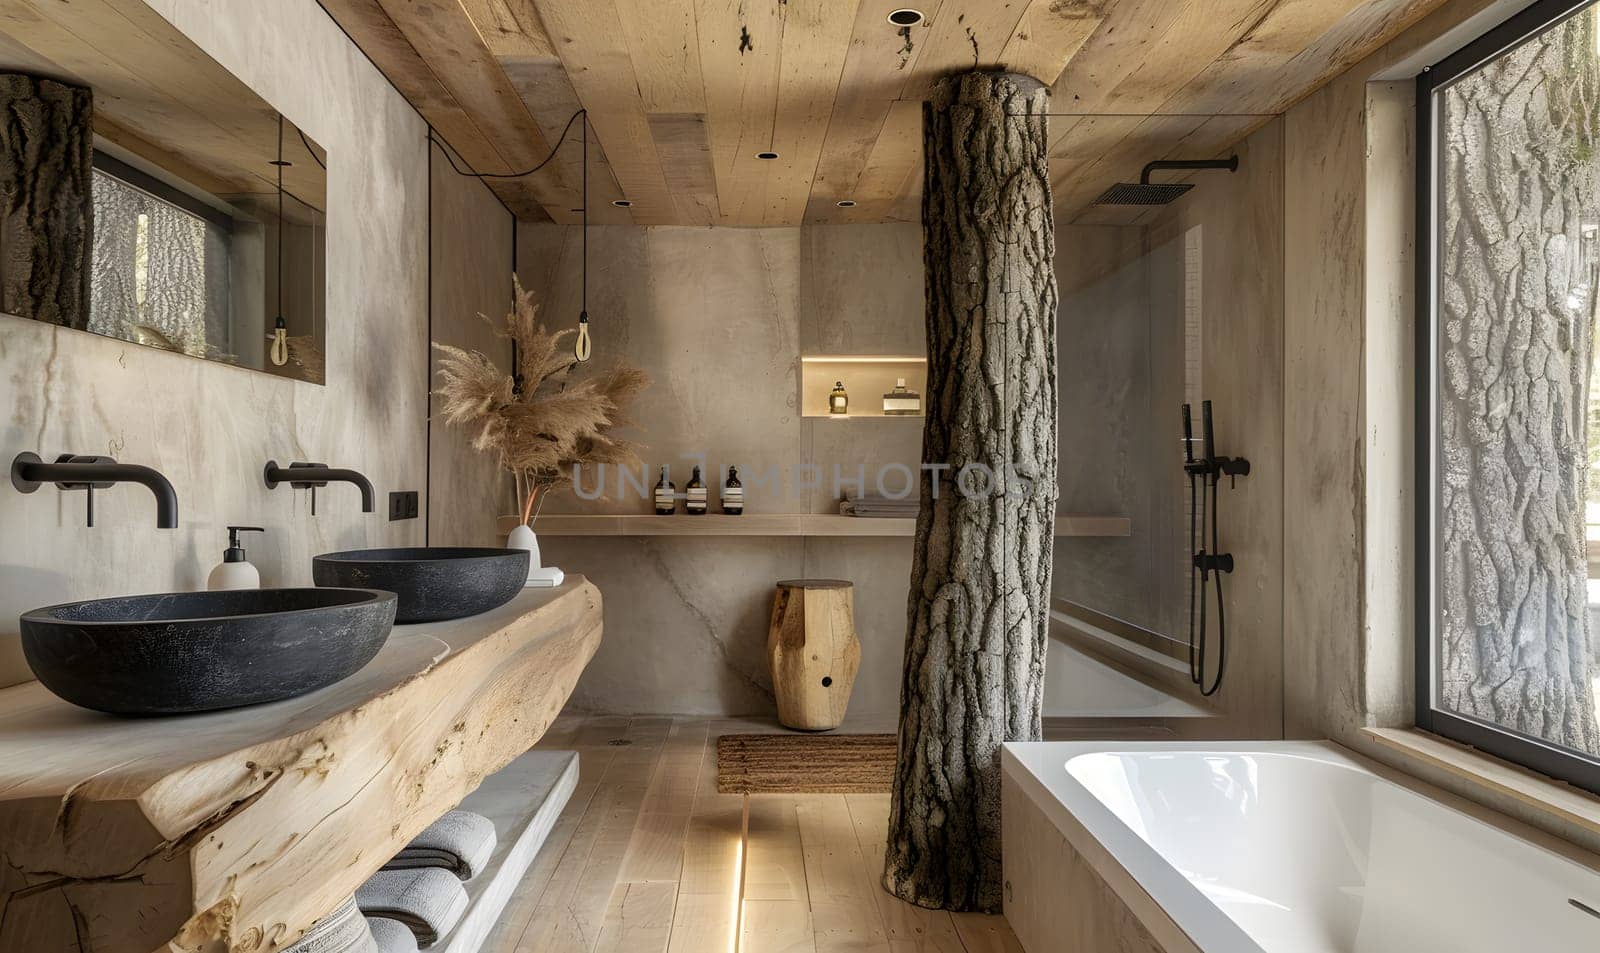 An interior design featuring a bathroom with two sinks, bathtub, wood flooring, and ample lighting from a window. The fixtures complement the overall style of the house